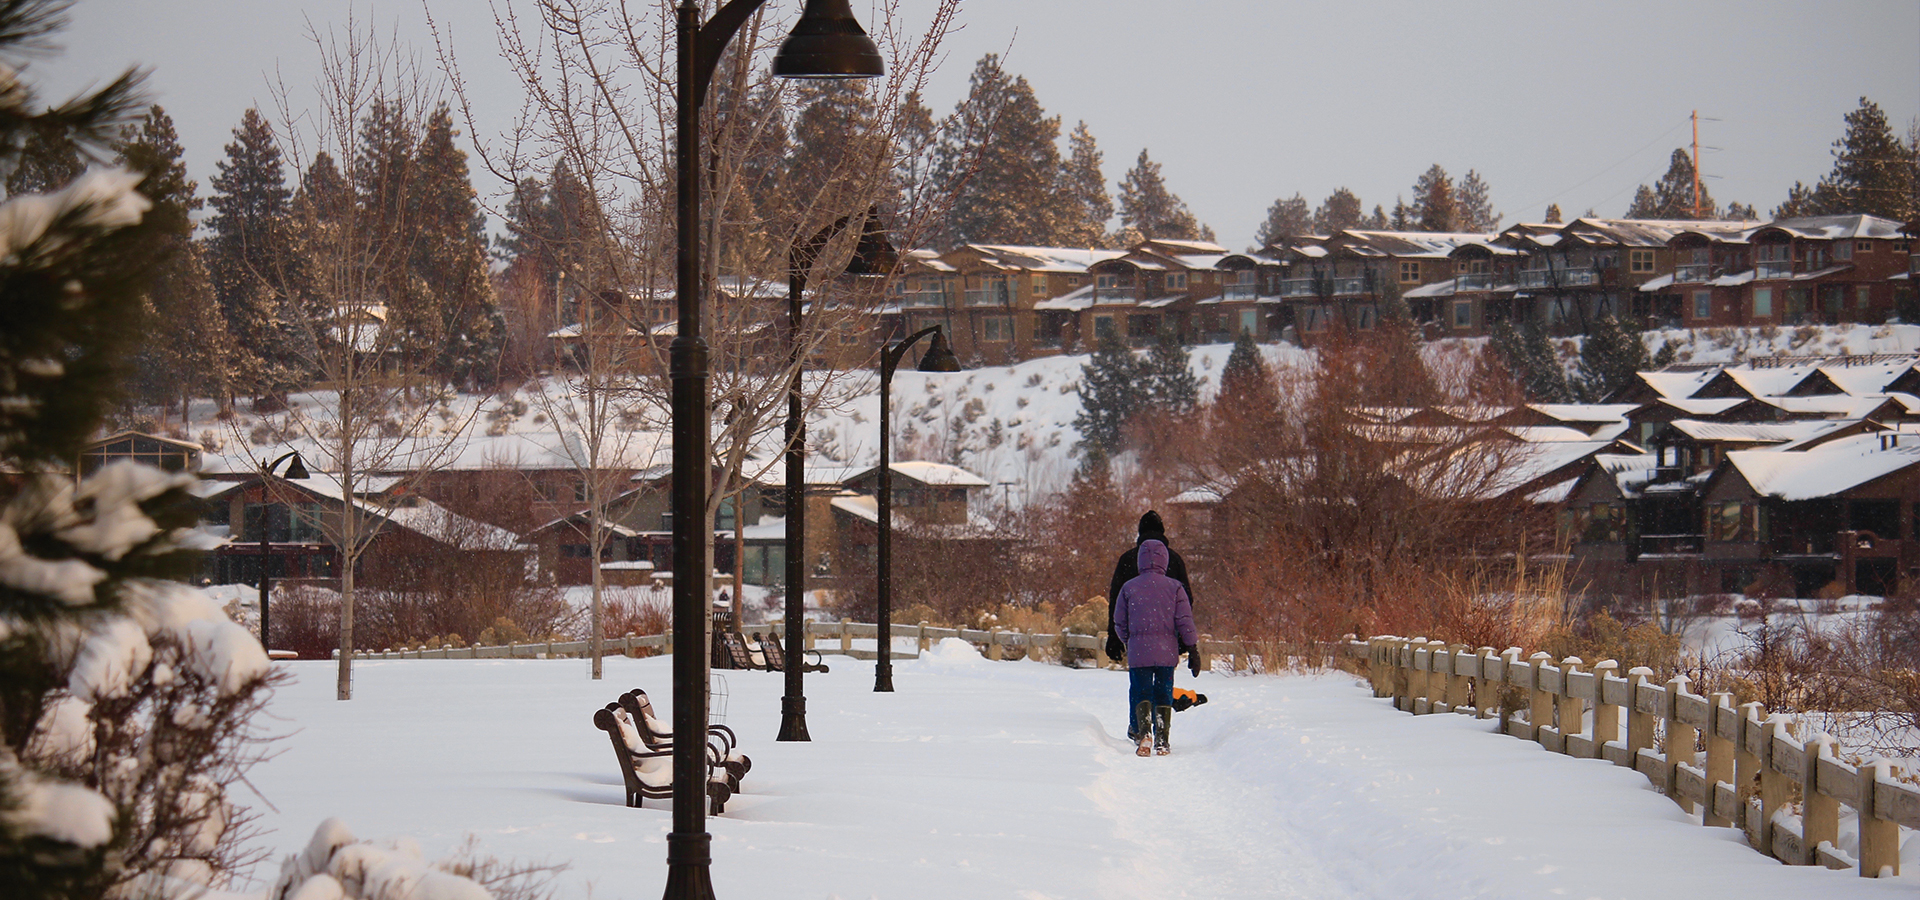 Two people walking in the snow at Riverbend Park.